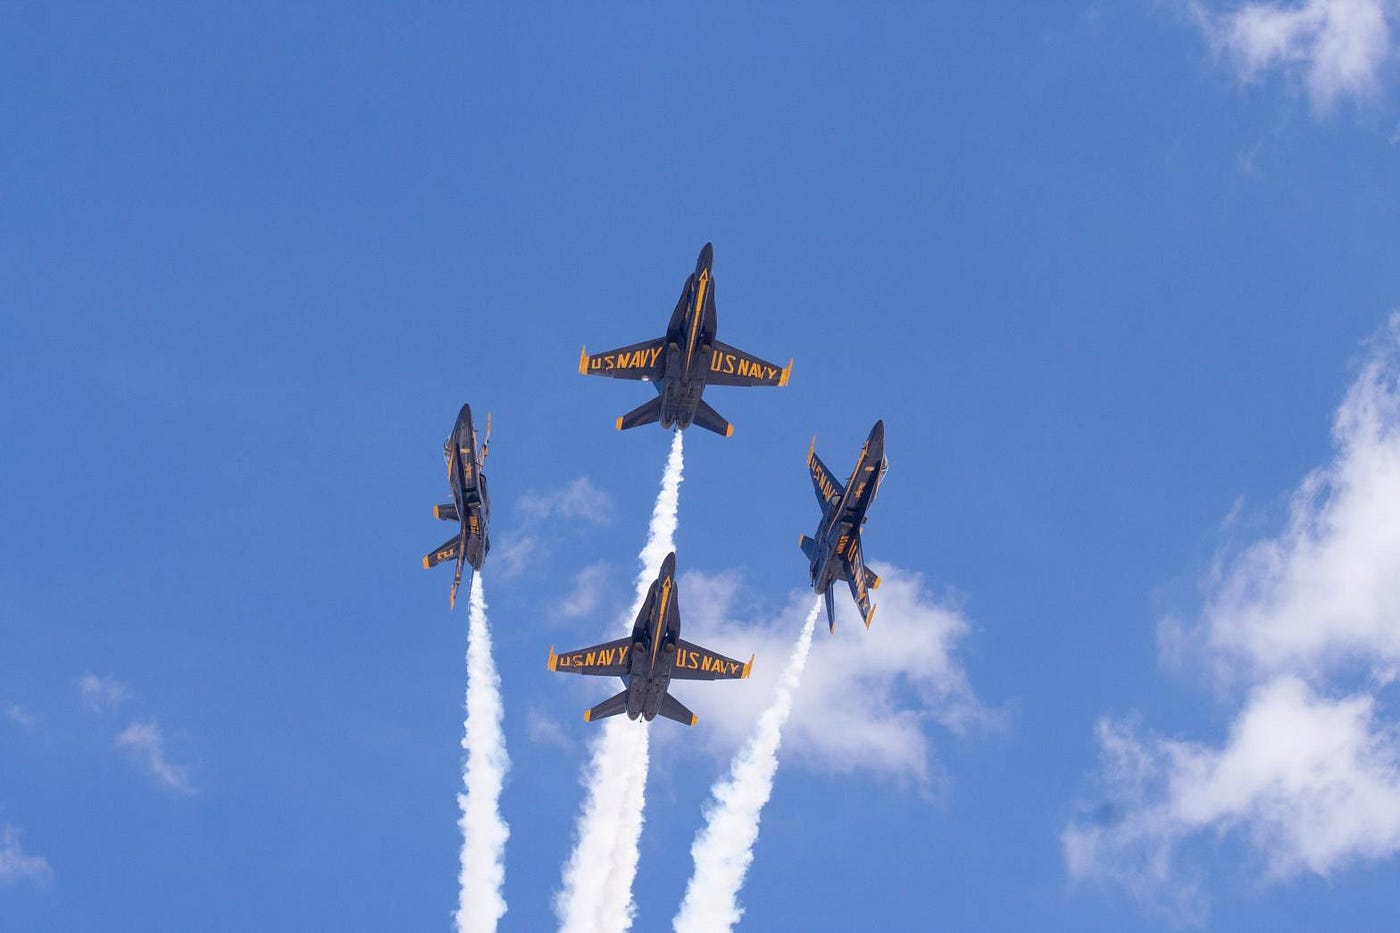 Mickey Markoff 2023 Air Sea Exec — photo of four US navy blue angels in flight